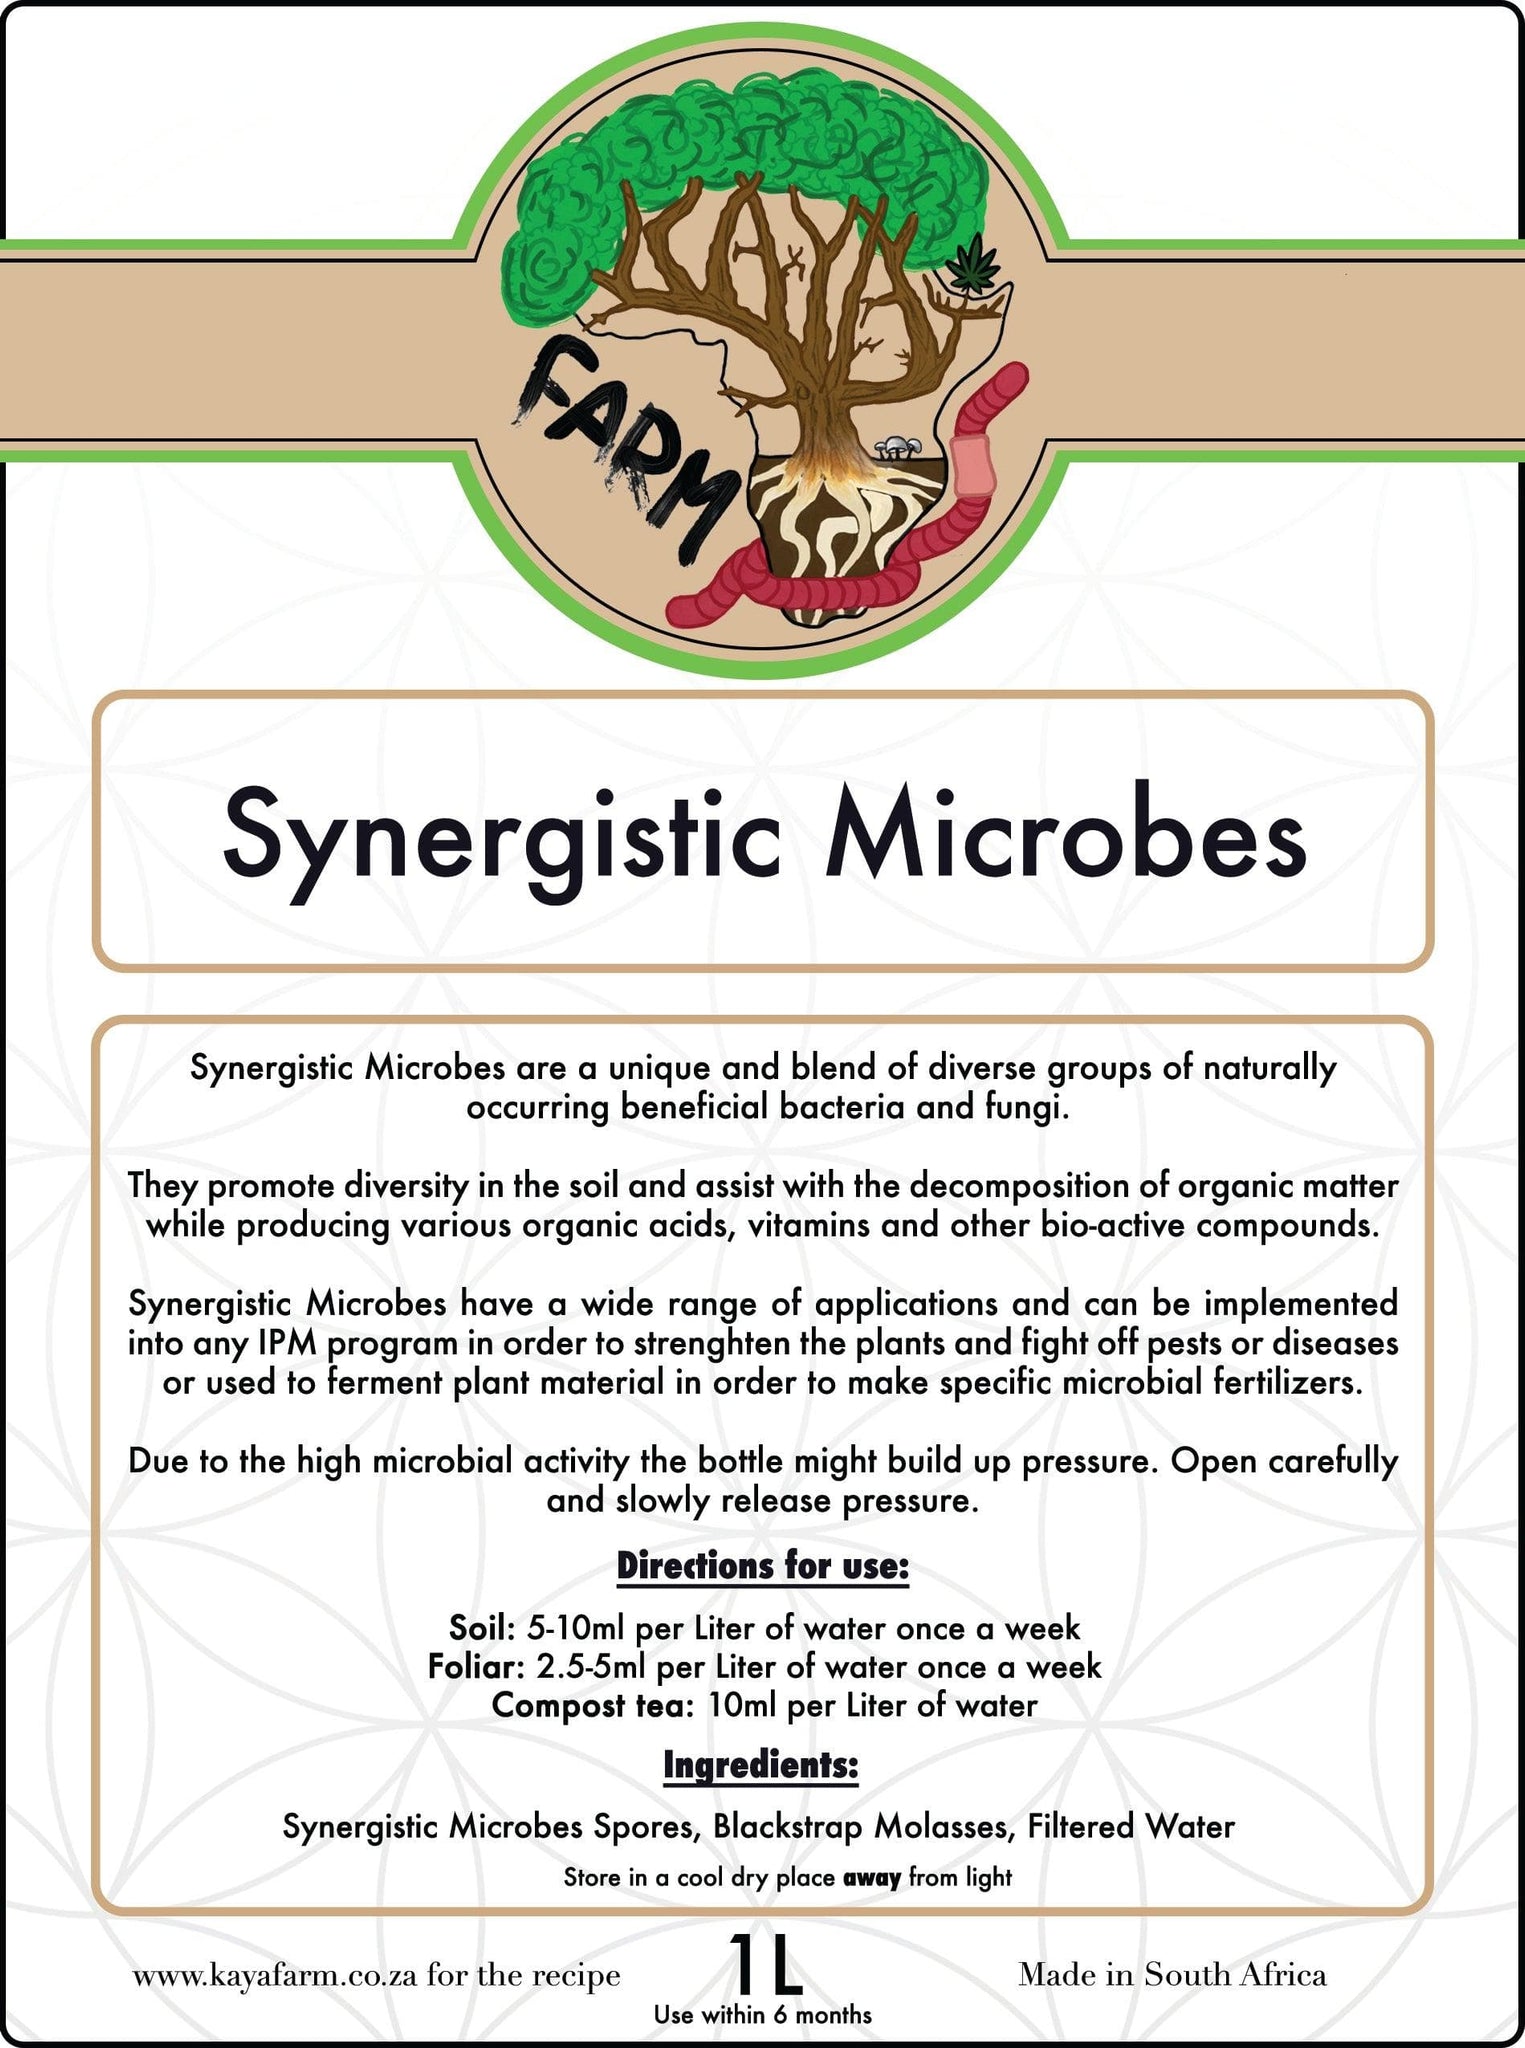 Synergistic Microbes